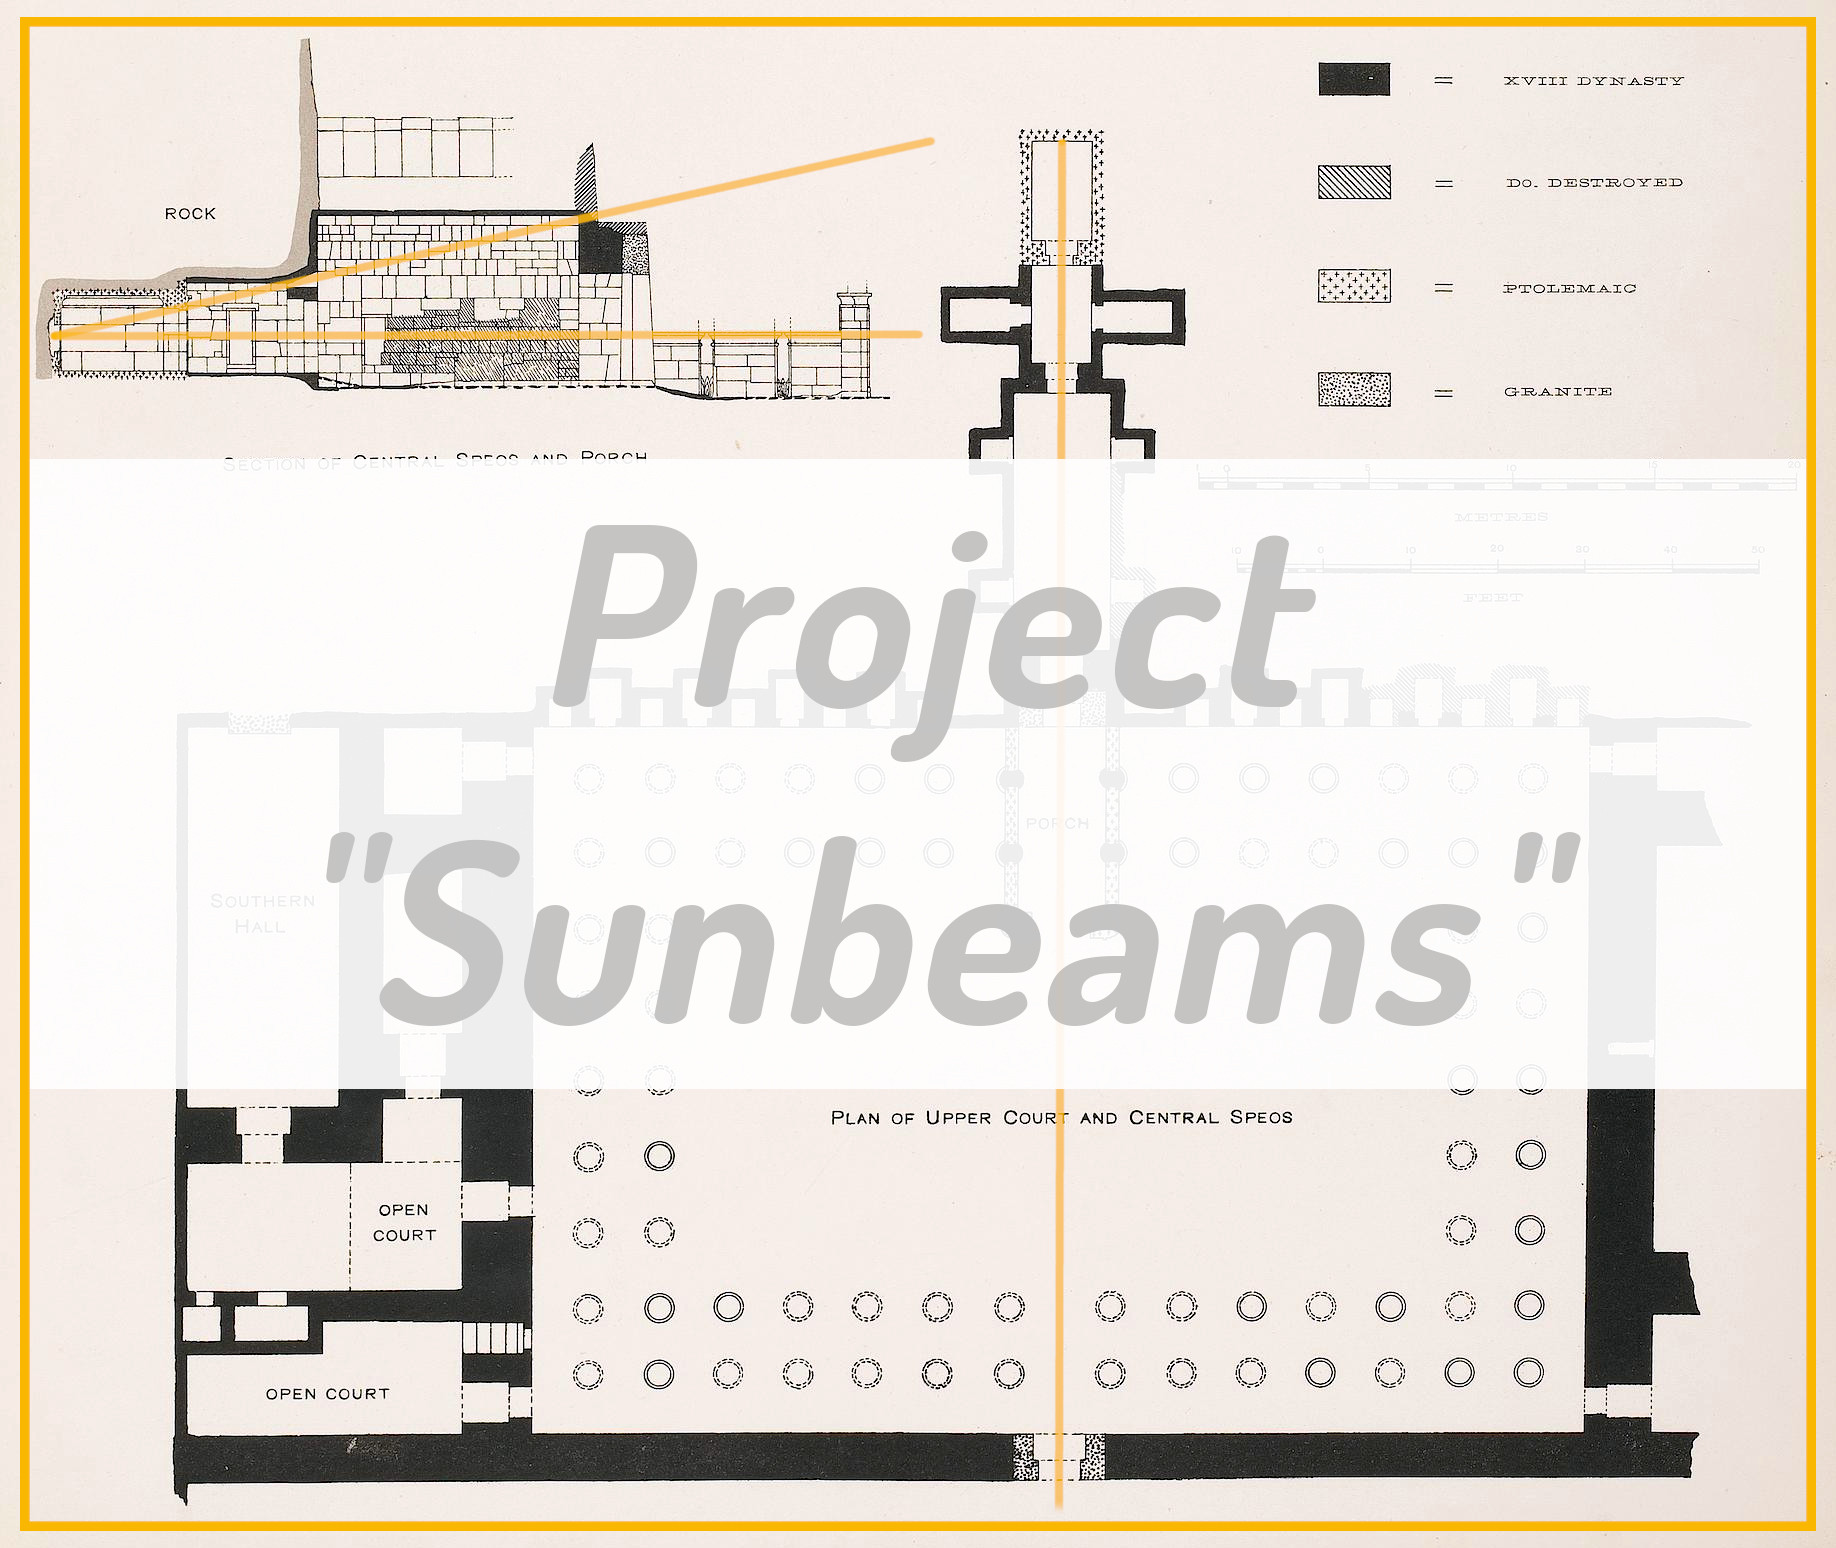 Project picture of the sunbeams project